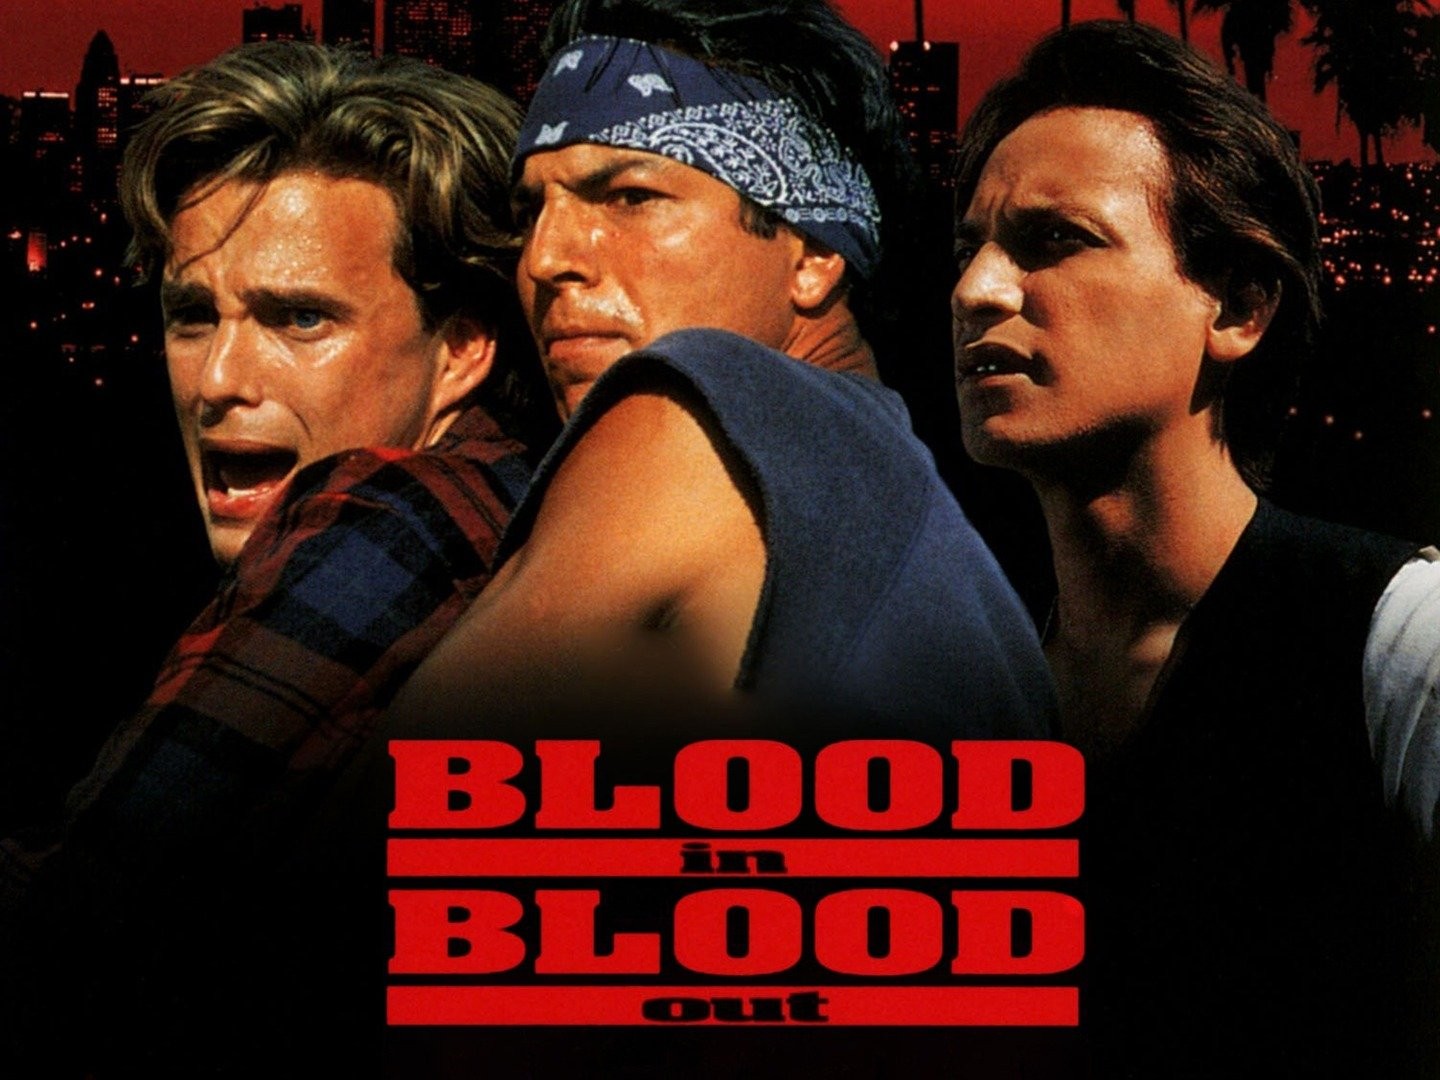 dan fetzner recommends full movie blood in blood out pic